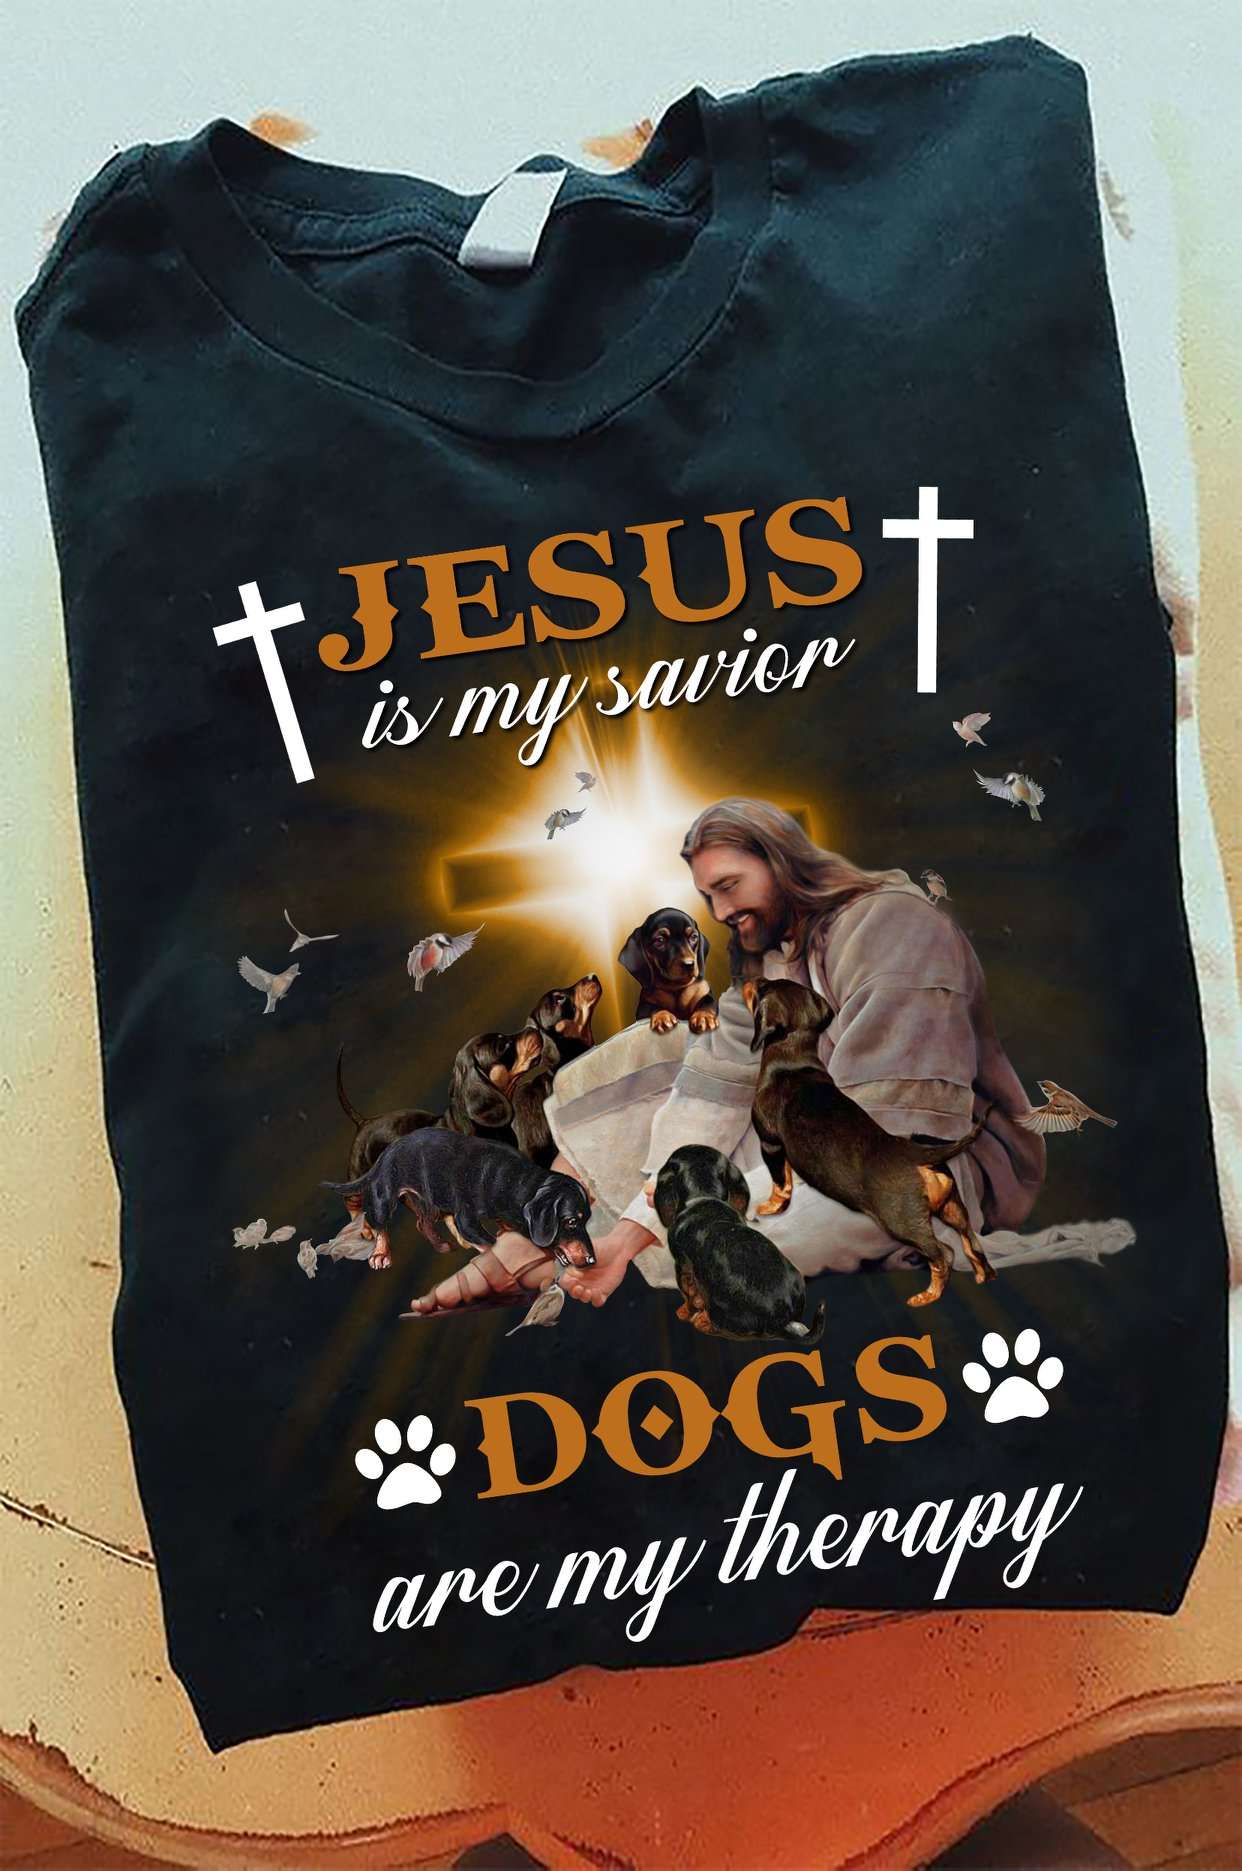 Jesus With Dachshund - Jesus is my savior dogs are my therapy